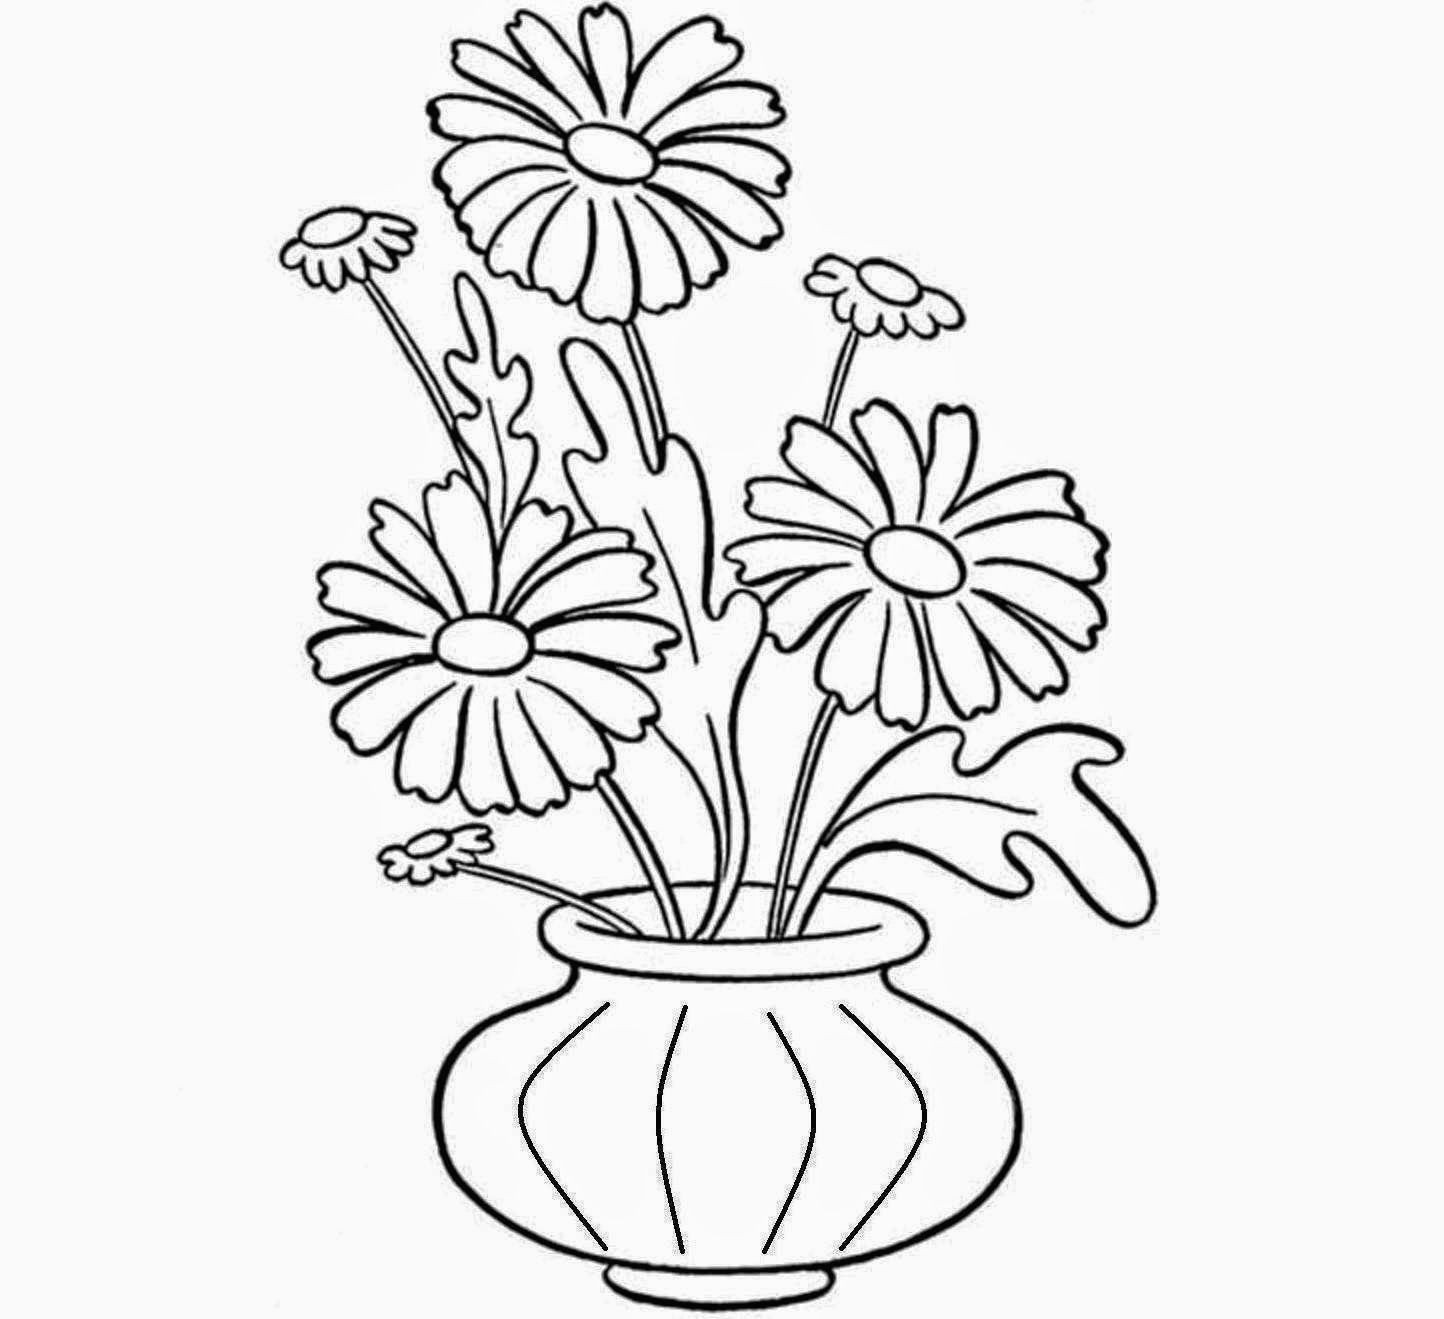 Drawings Of Large Flowers Mind Blowing Tips Vases Vintage Glass Vases Garden Center Pieces